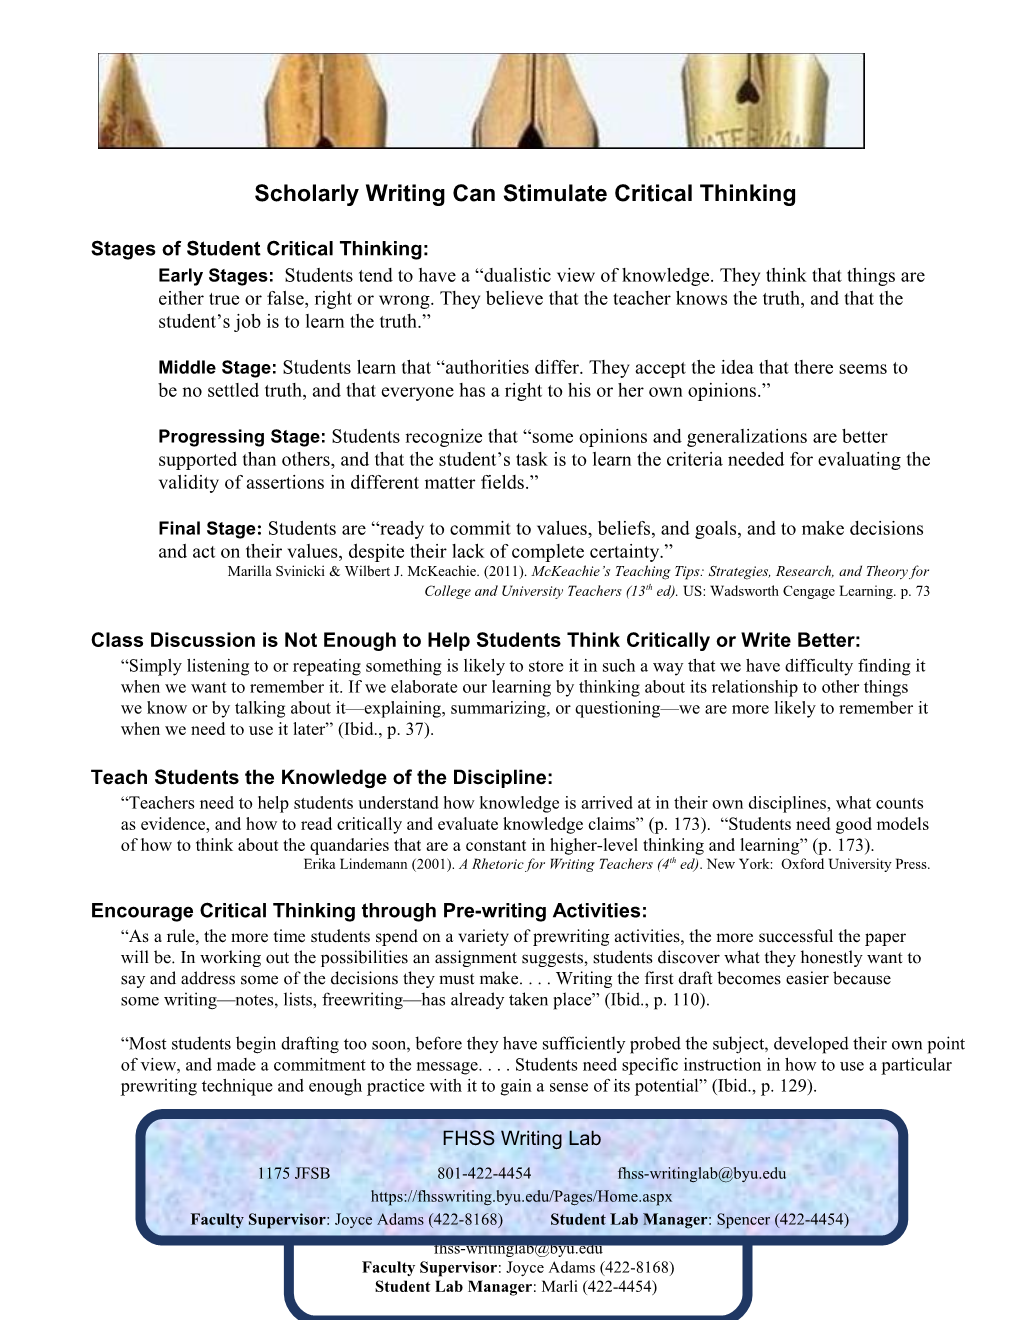 Scholarly Writing Can Stimulate Critical Thinking